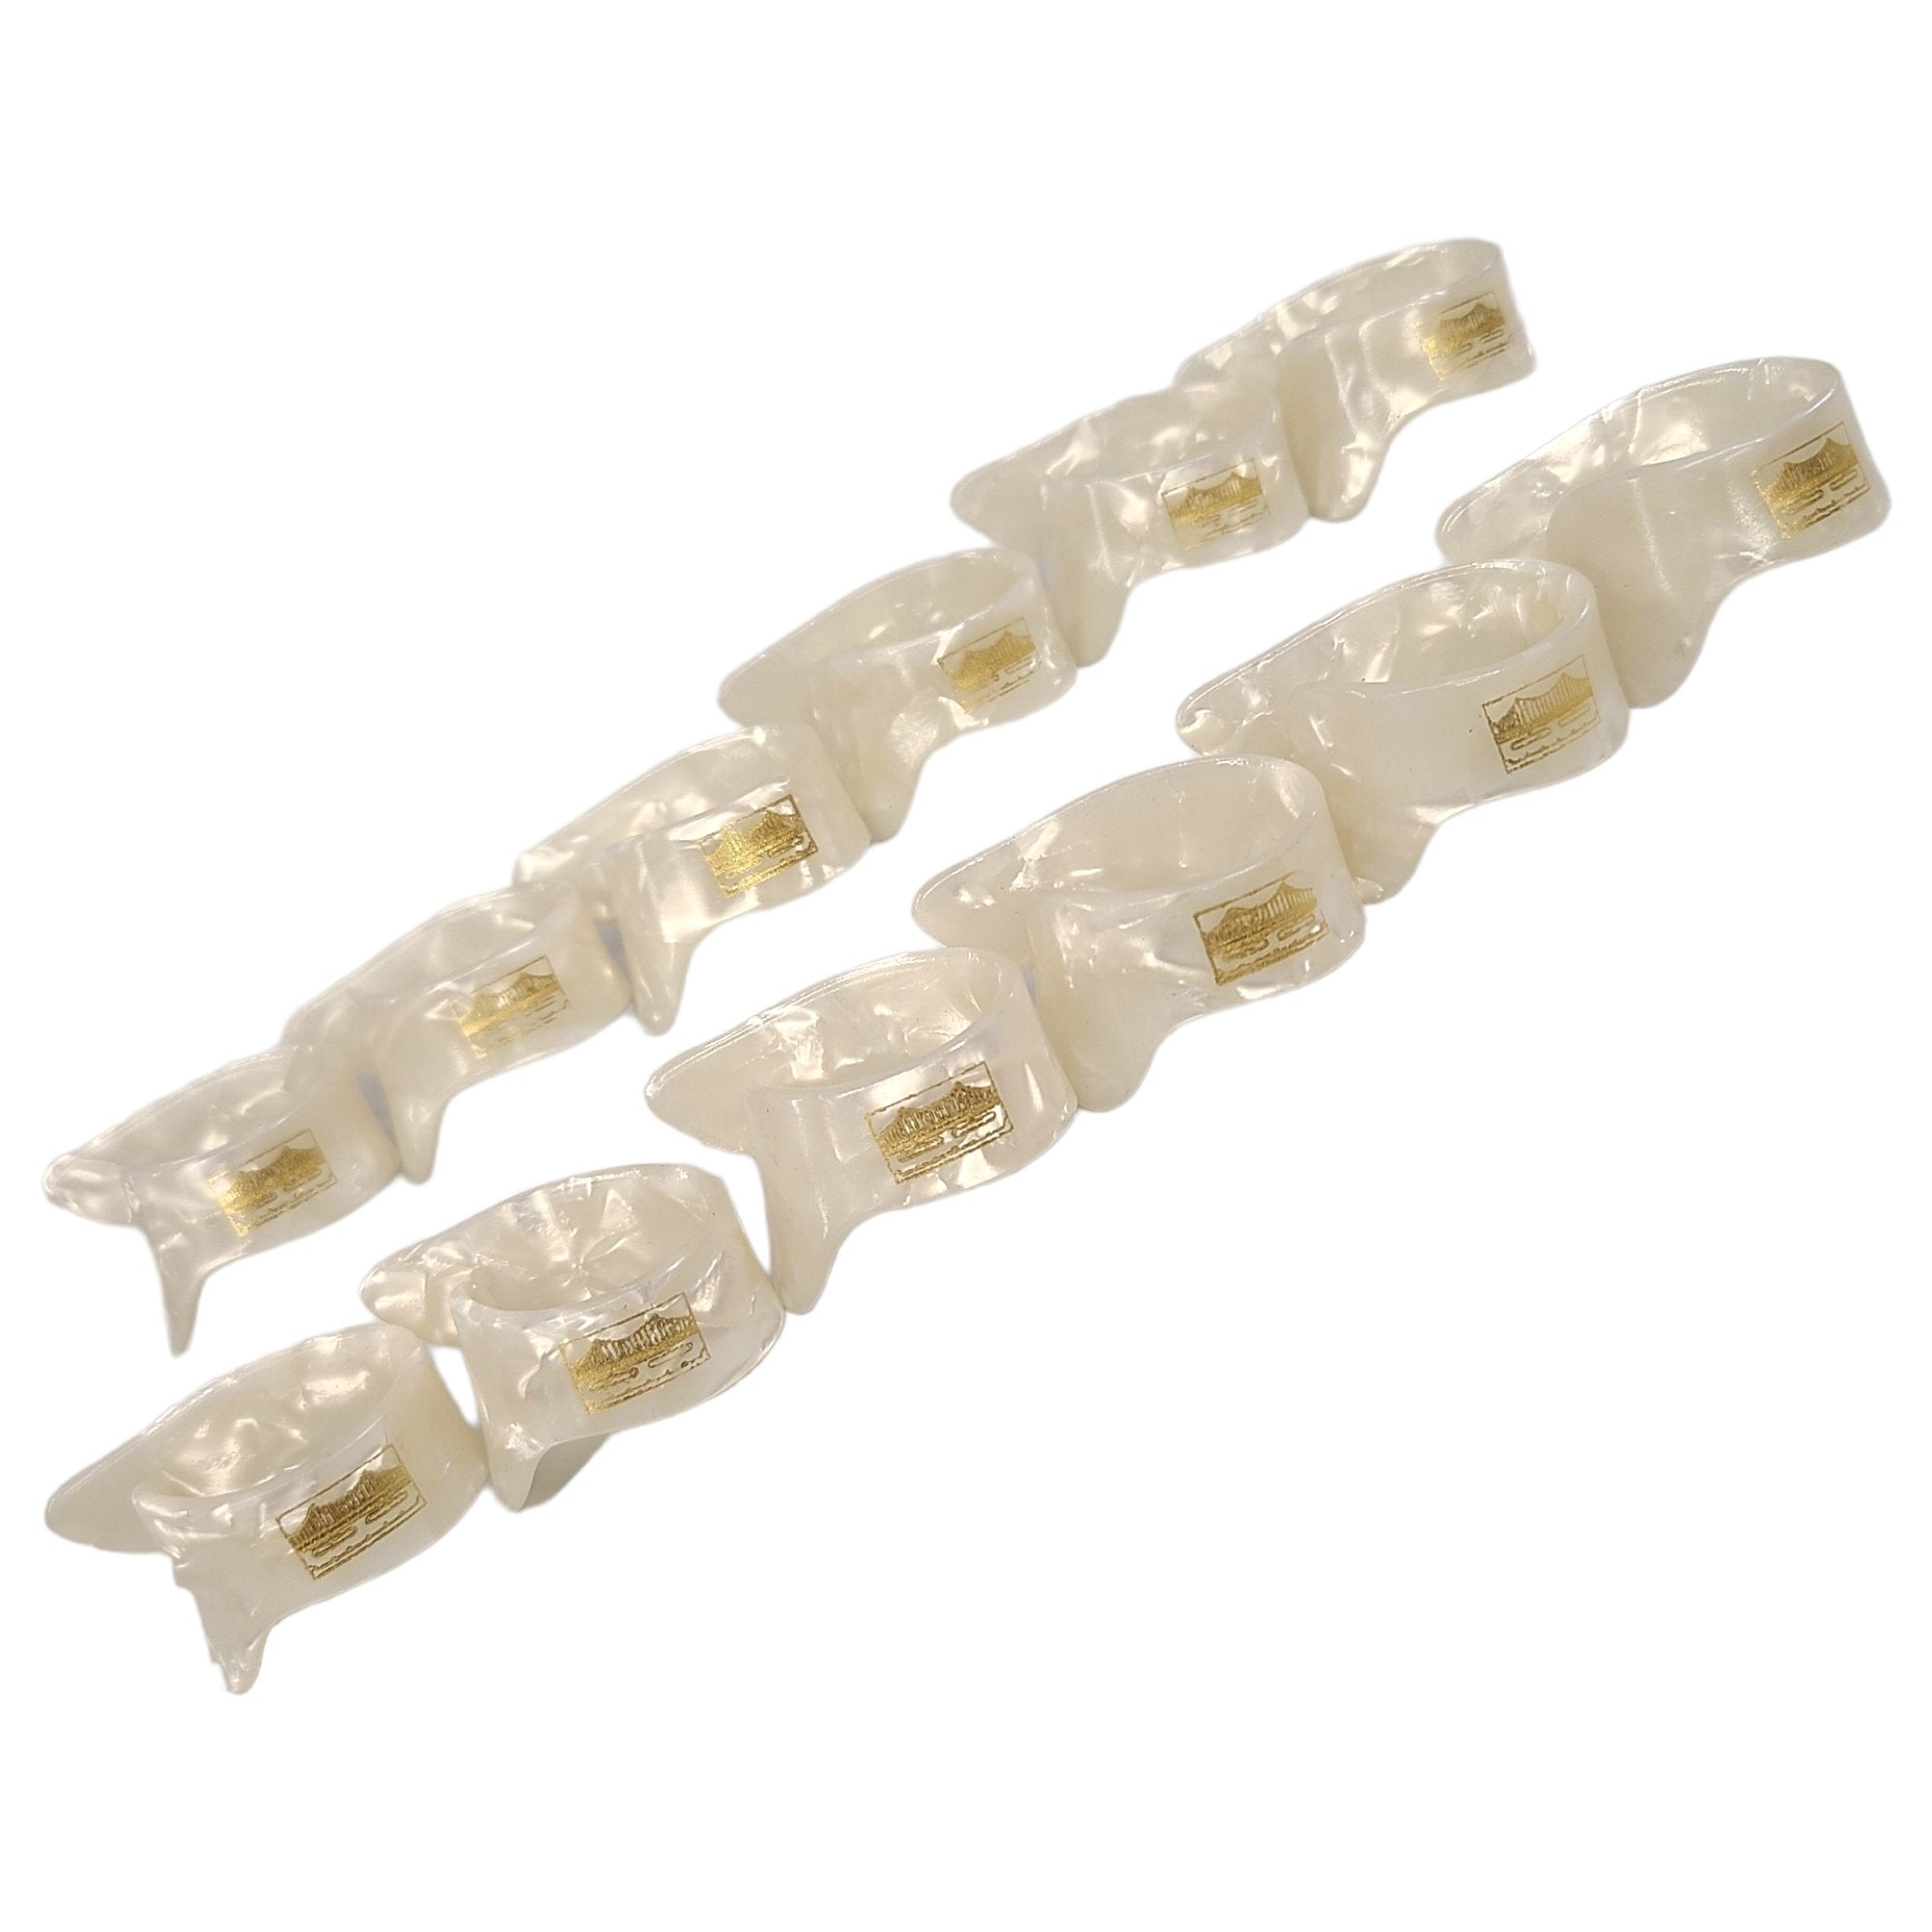 Golden Gate Large/Extra Thick Pearloid Thumb Picks, 12pk